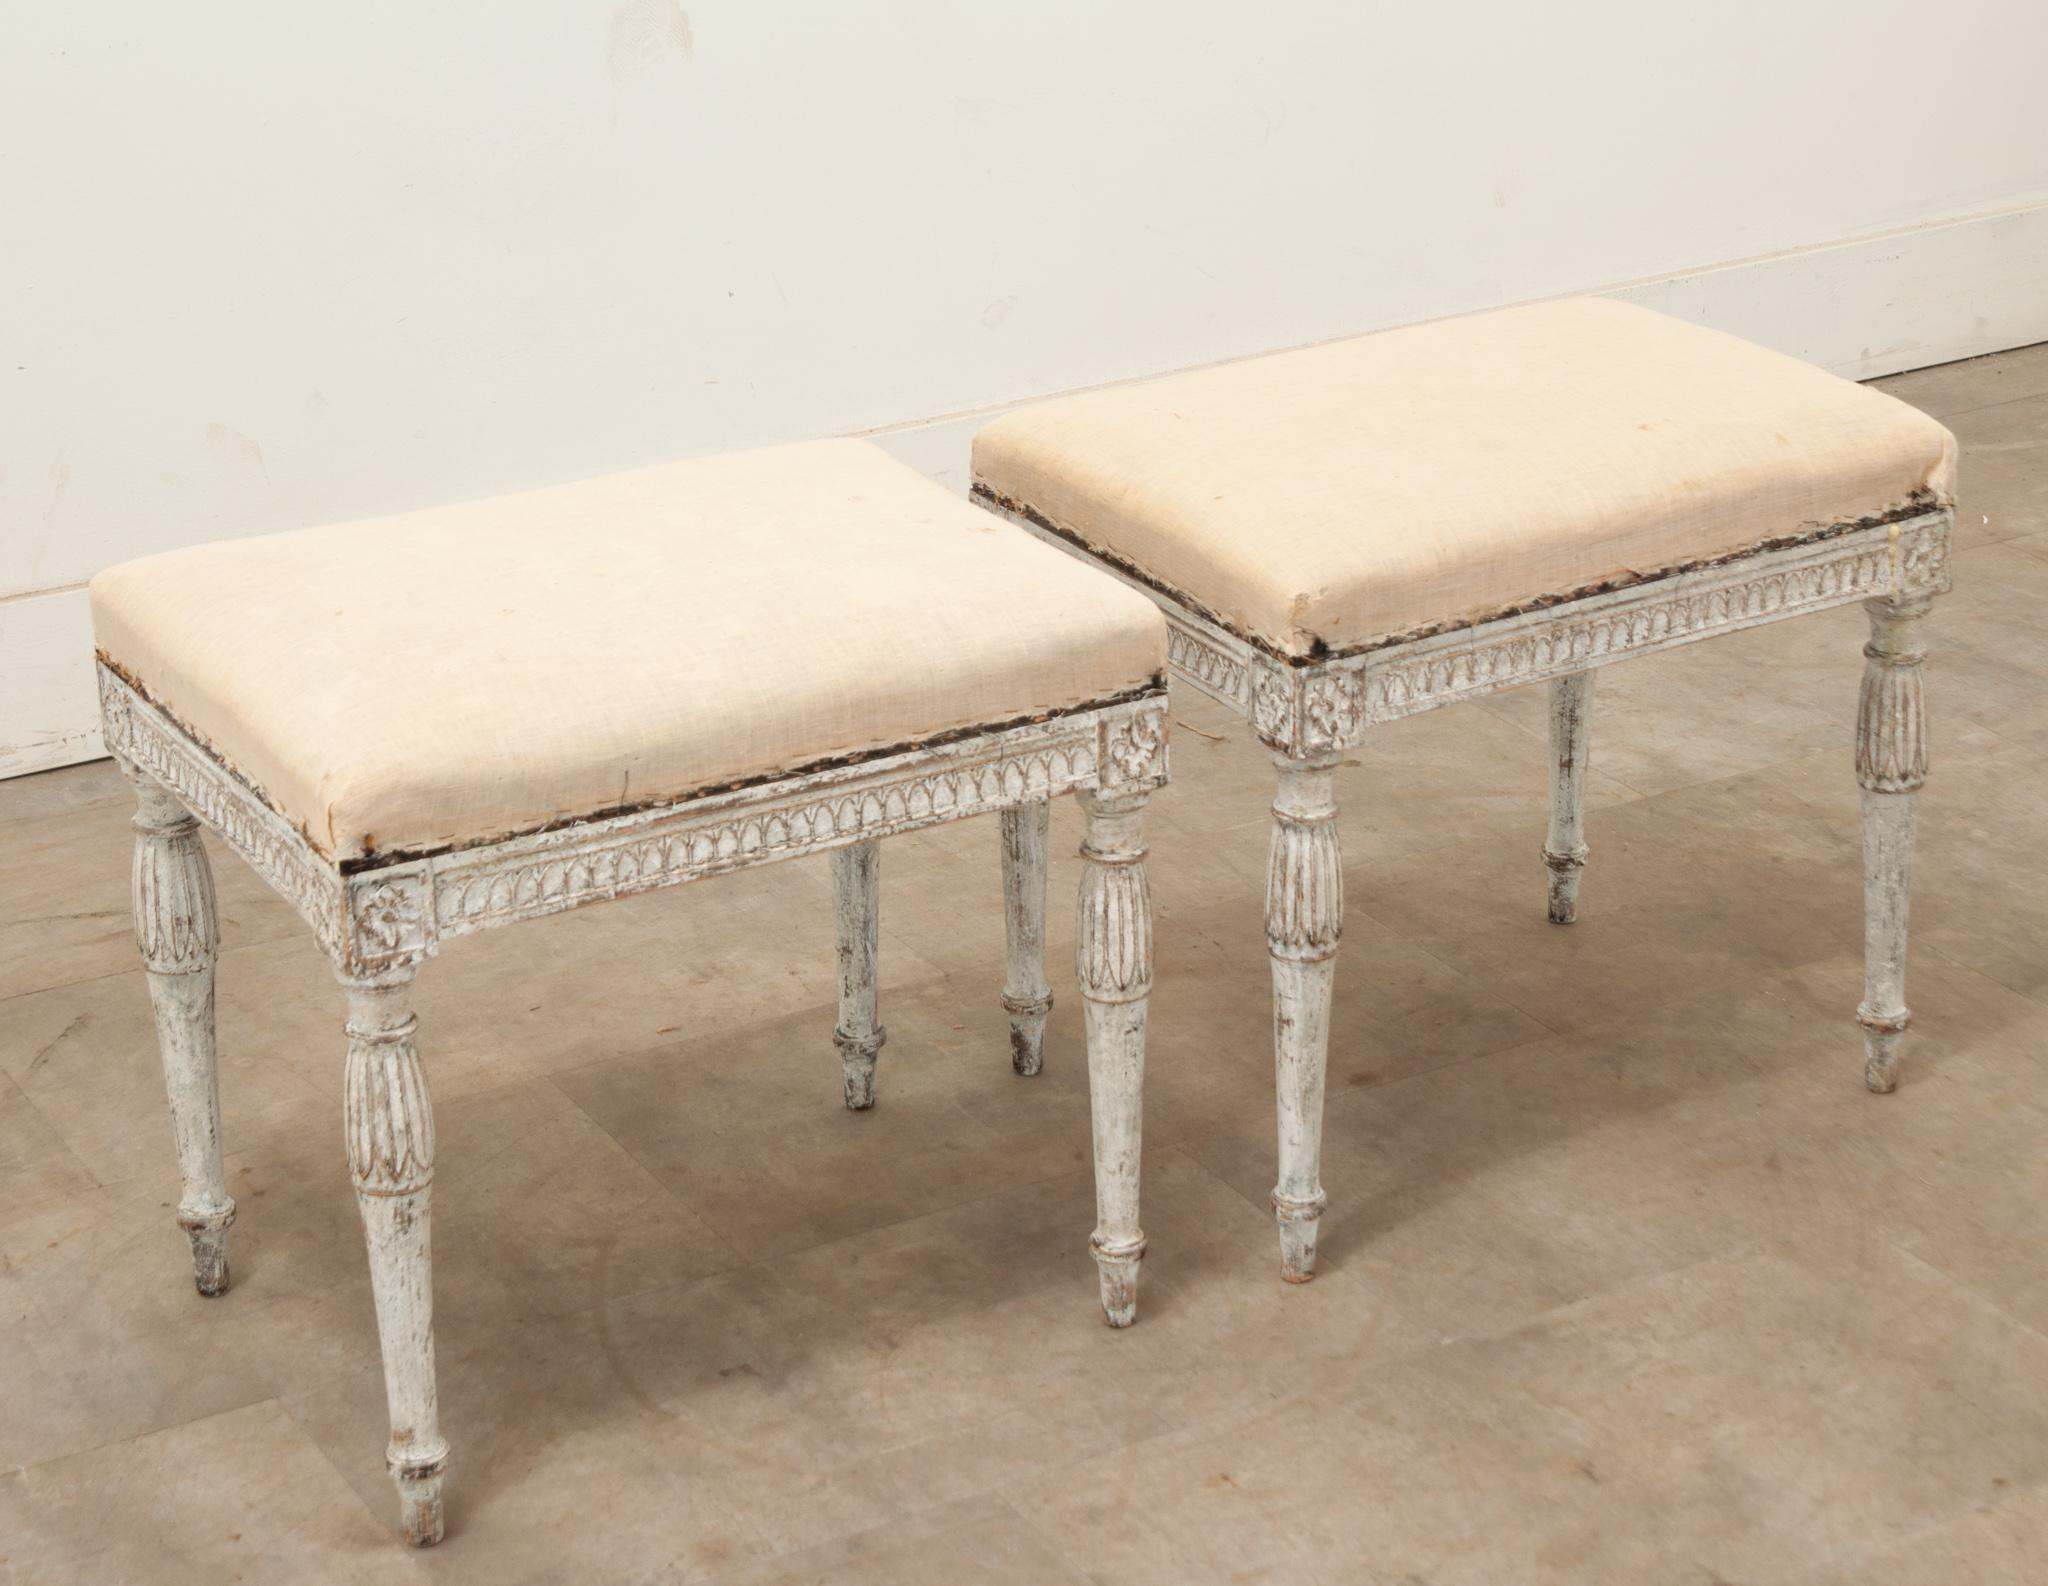 Pair of Swedish 18th Century Louis XVI Style Benches In Good Condition For Sale In Baton Rouge, LA